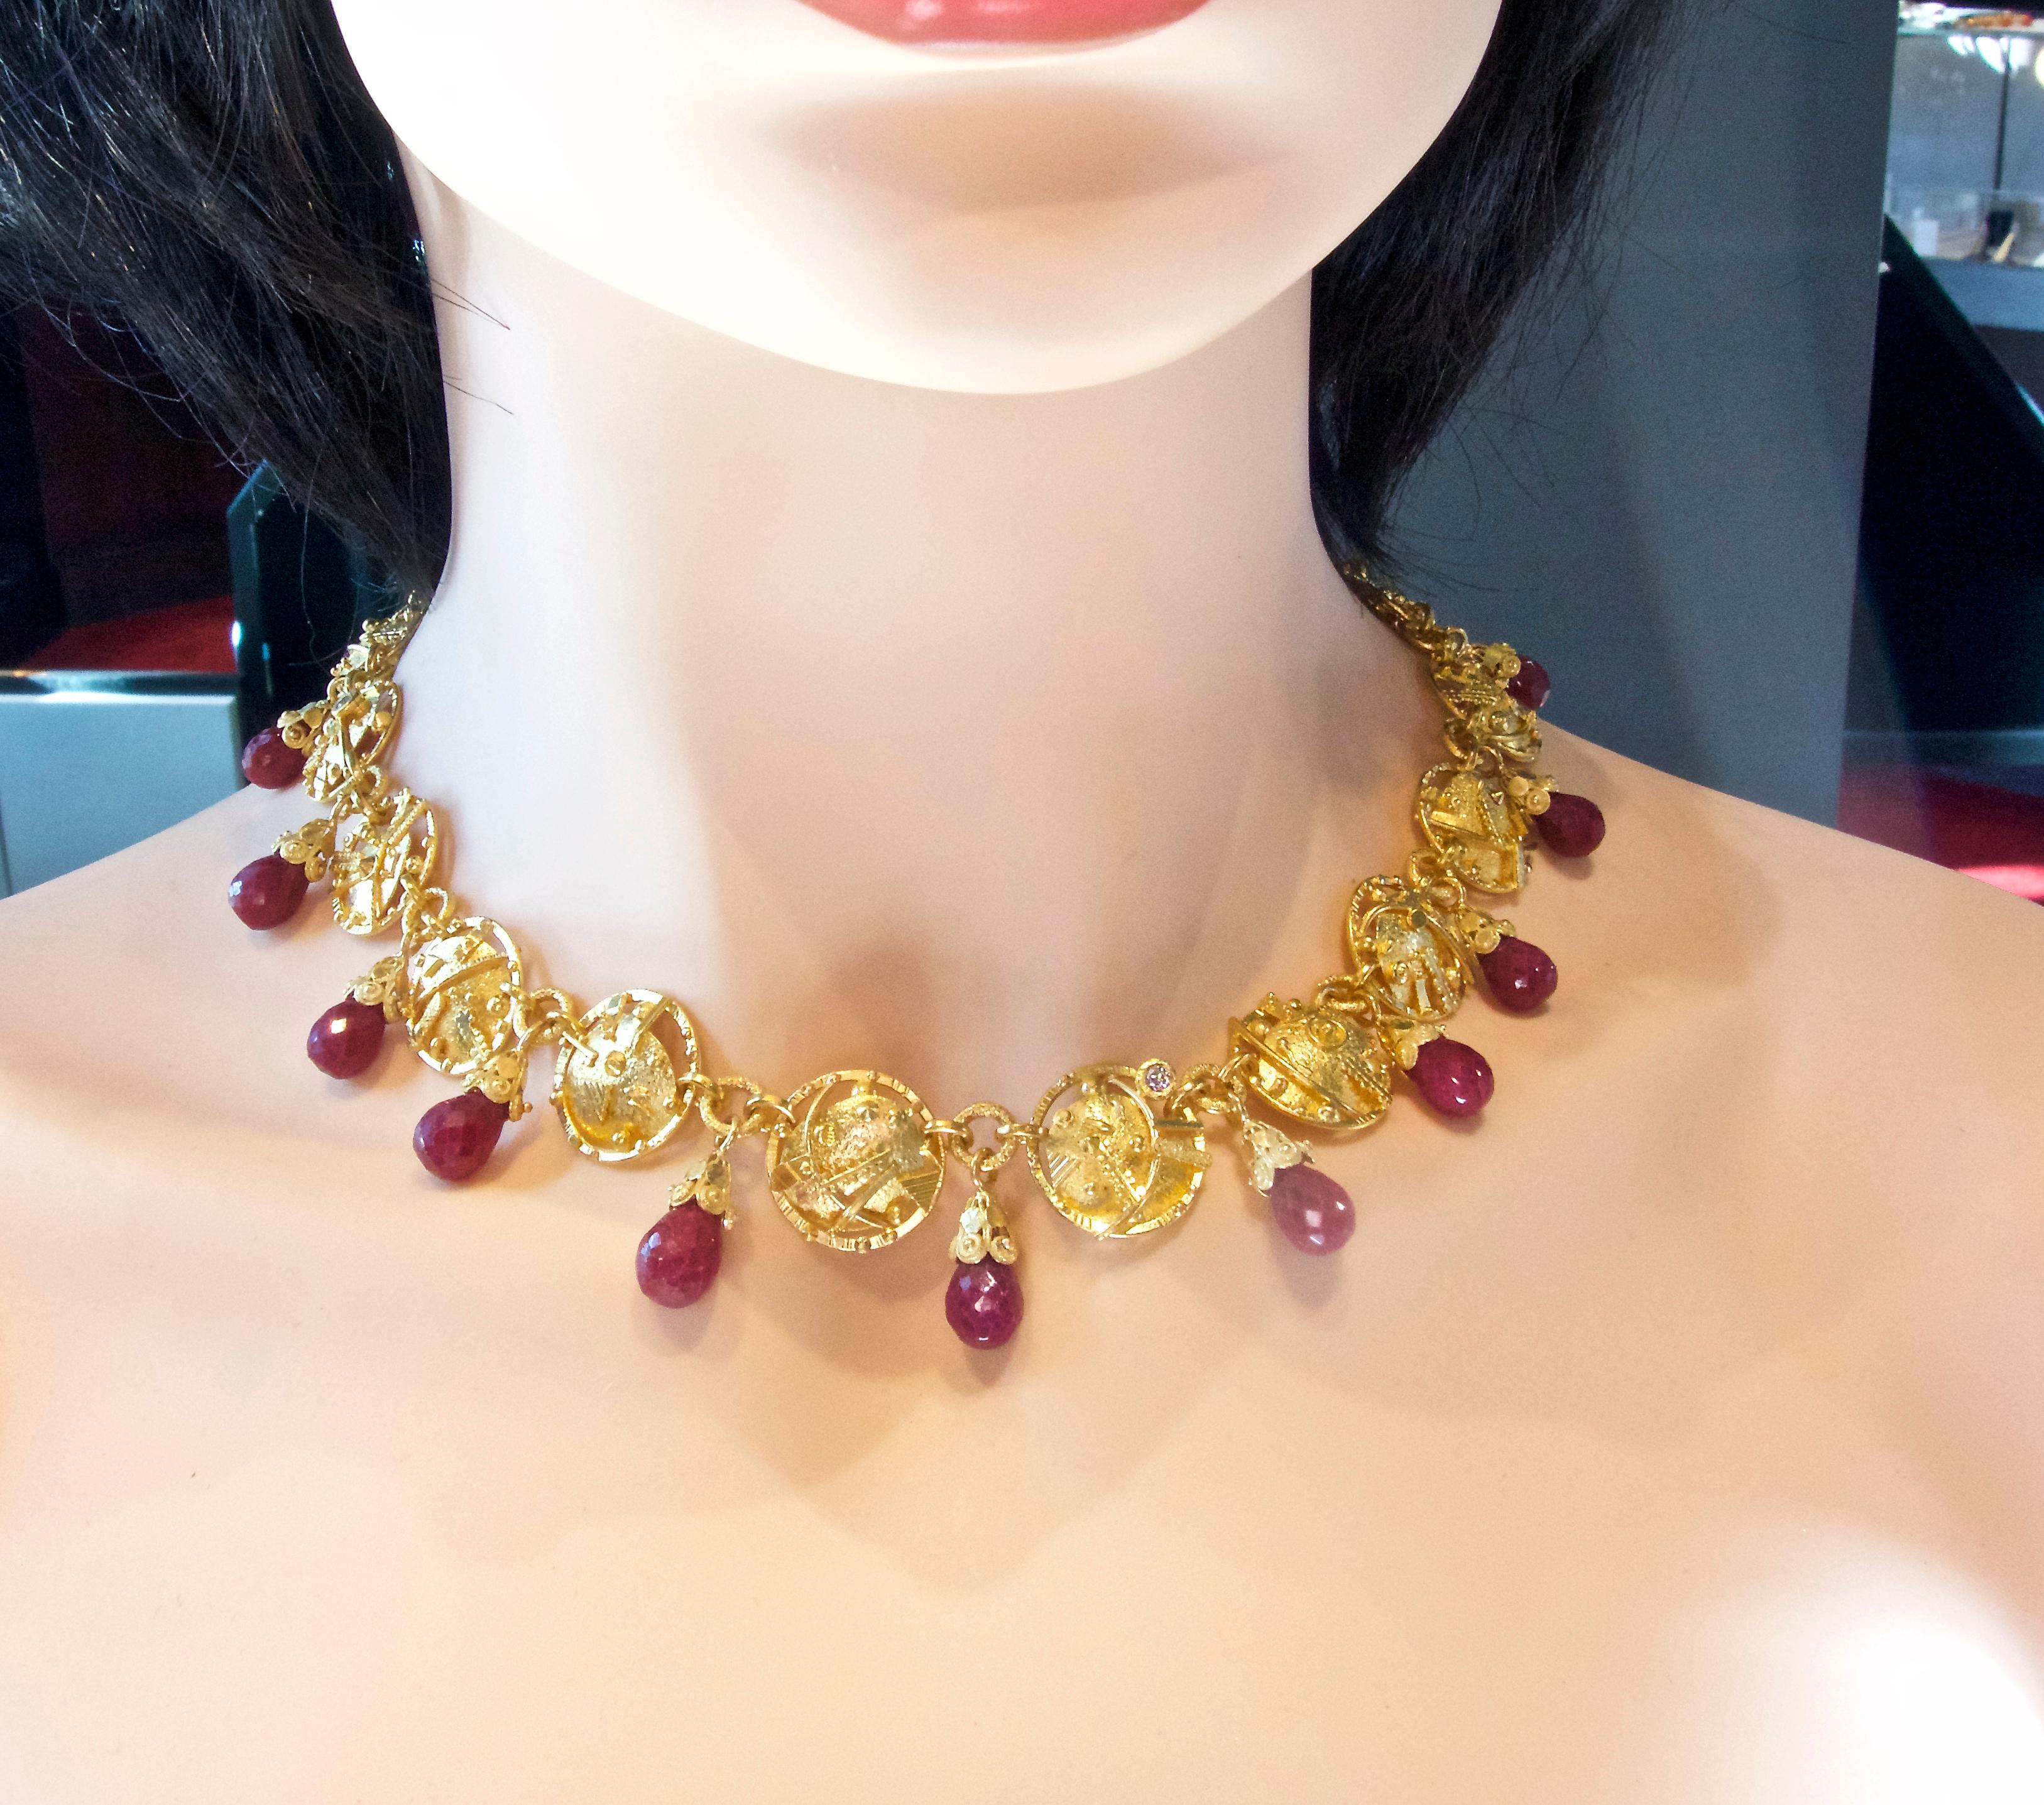 Women's or Men's Modernistic Gold Necklace with Rubies and Diamonds